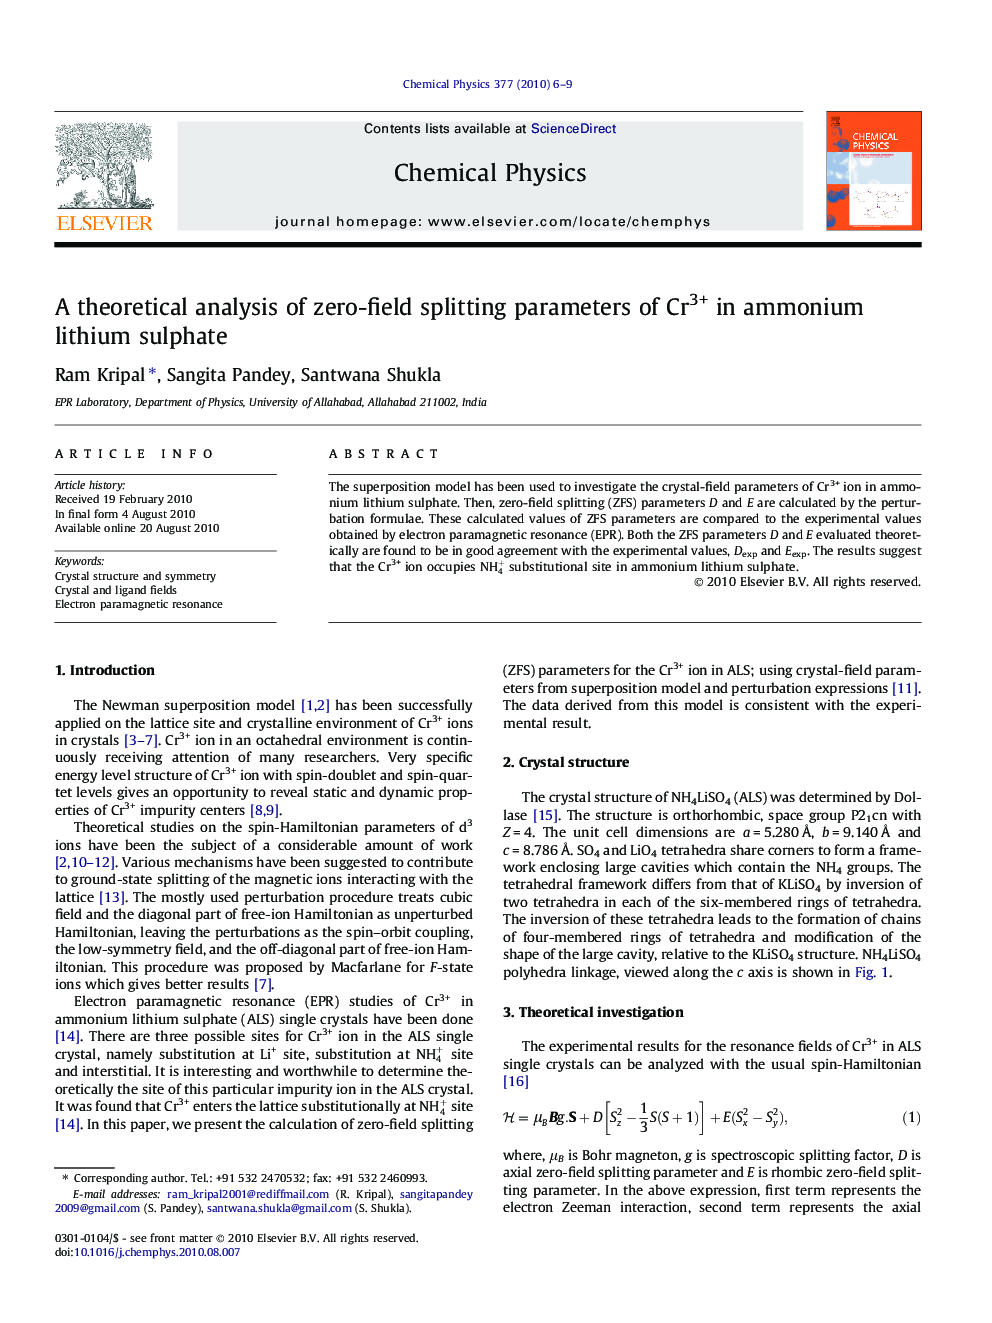 A theoretical analysis of zero-field splitting parameters of Cr3+ in ammonium lithium sulphate